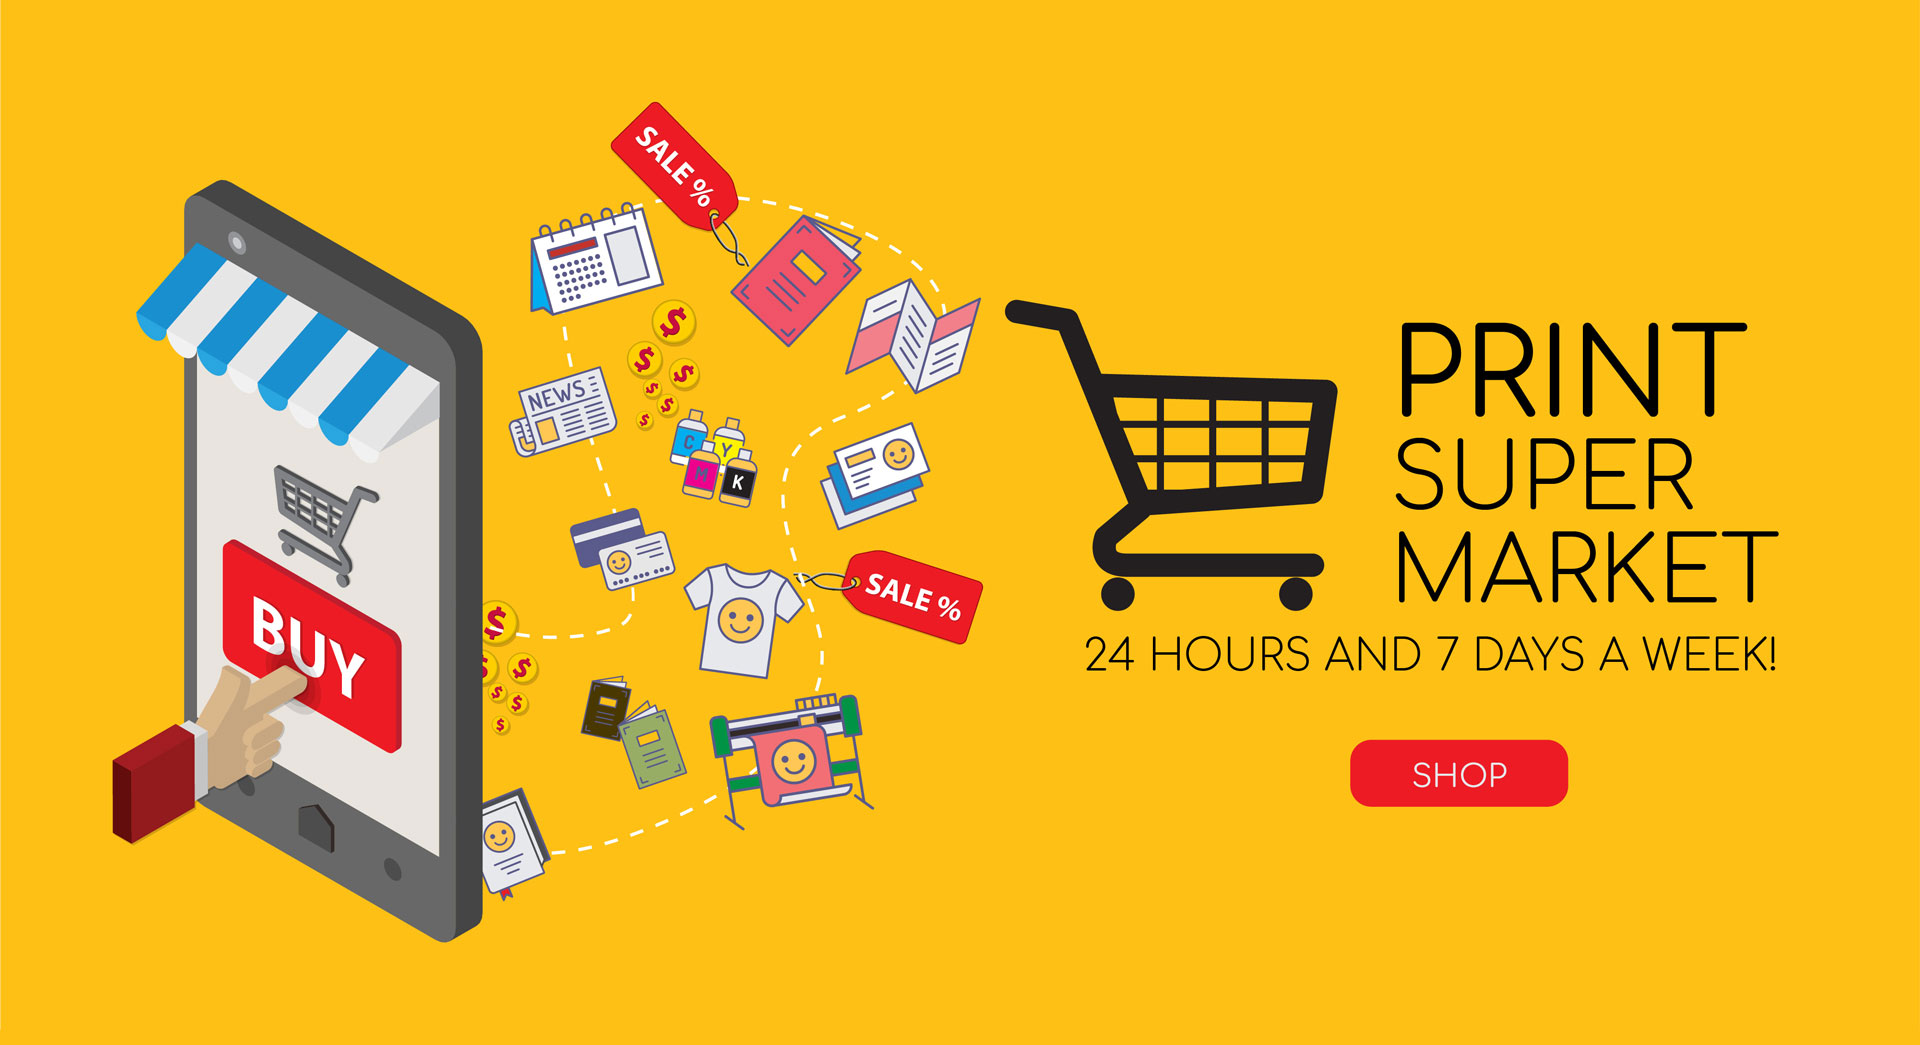 Print Super Market 24 Hours and 7 Days a week!